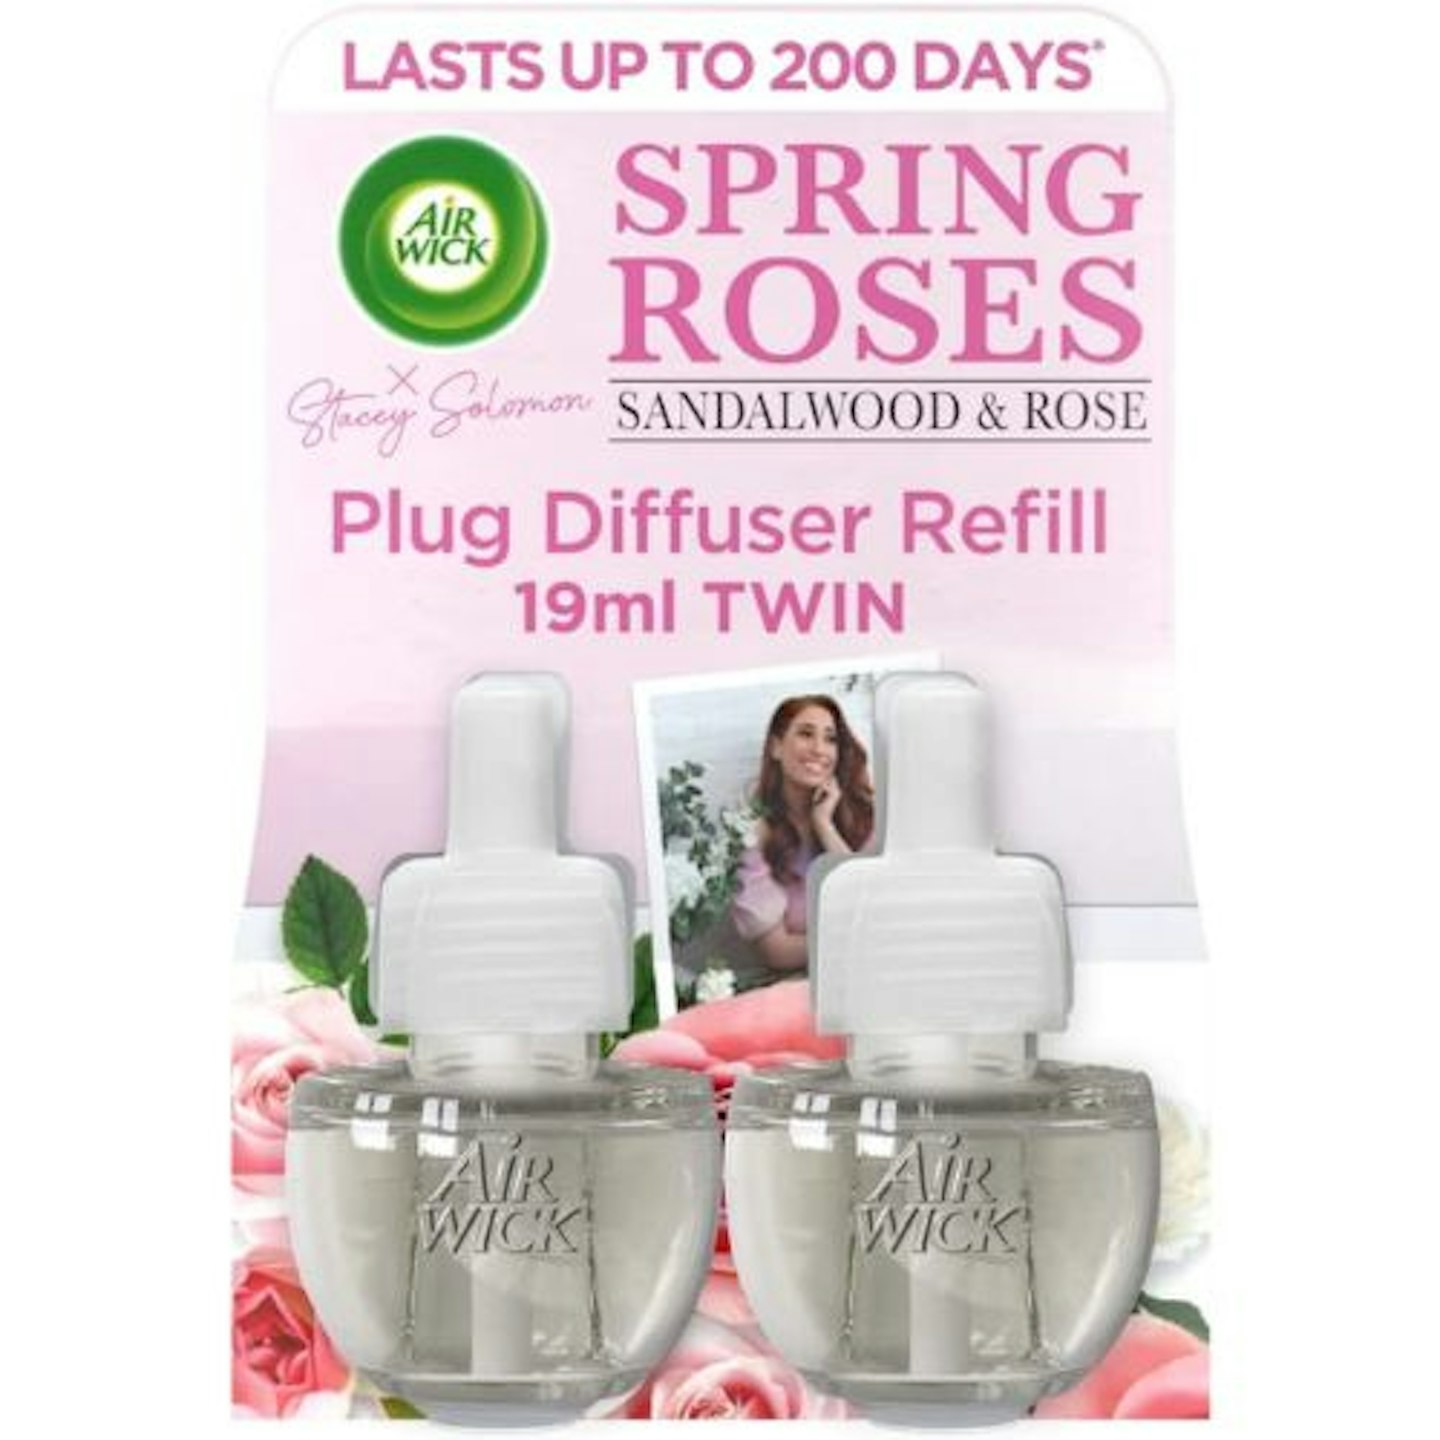 Air Wick Spring Roses Scented Oil Electrical Plug-In Diffuser Twin Refill 19ml